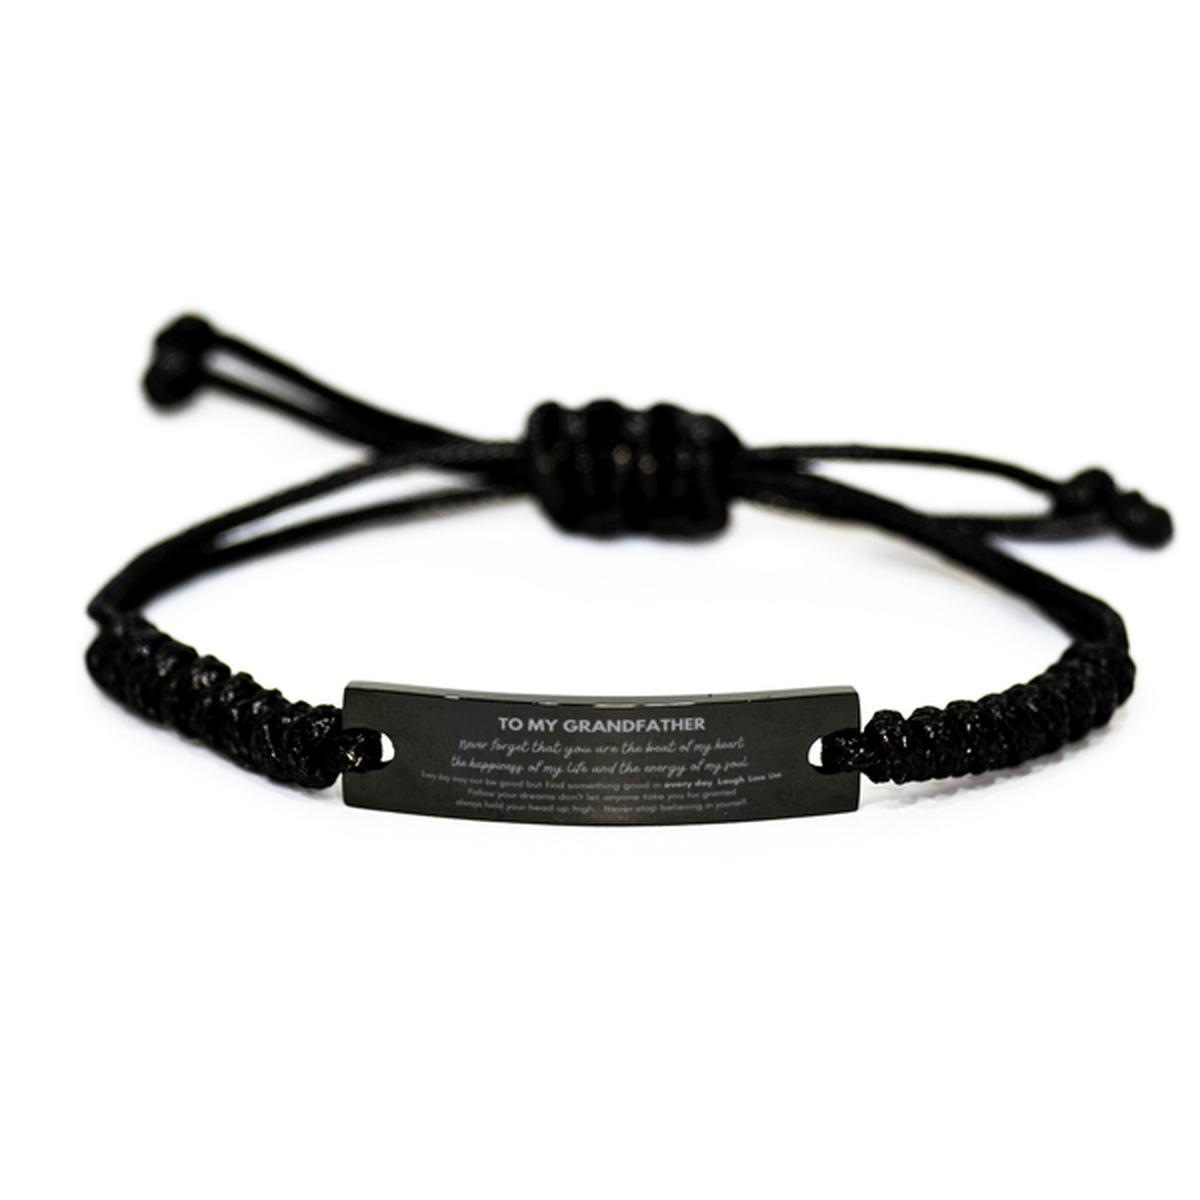 To My Grandfather Bracelet Gifts, Christmas Grandfather Black Rope Bracelet Present, Birthday Unique Motivational For Grandfather, To My Grandfather Never forget that you are the beat of my heart the happiness of my life and the energy of my soul